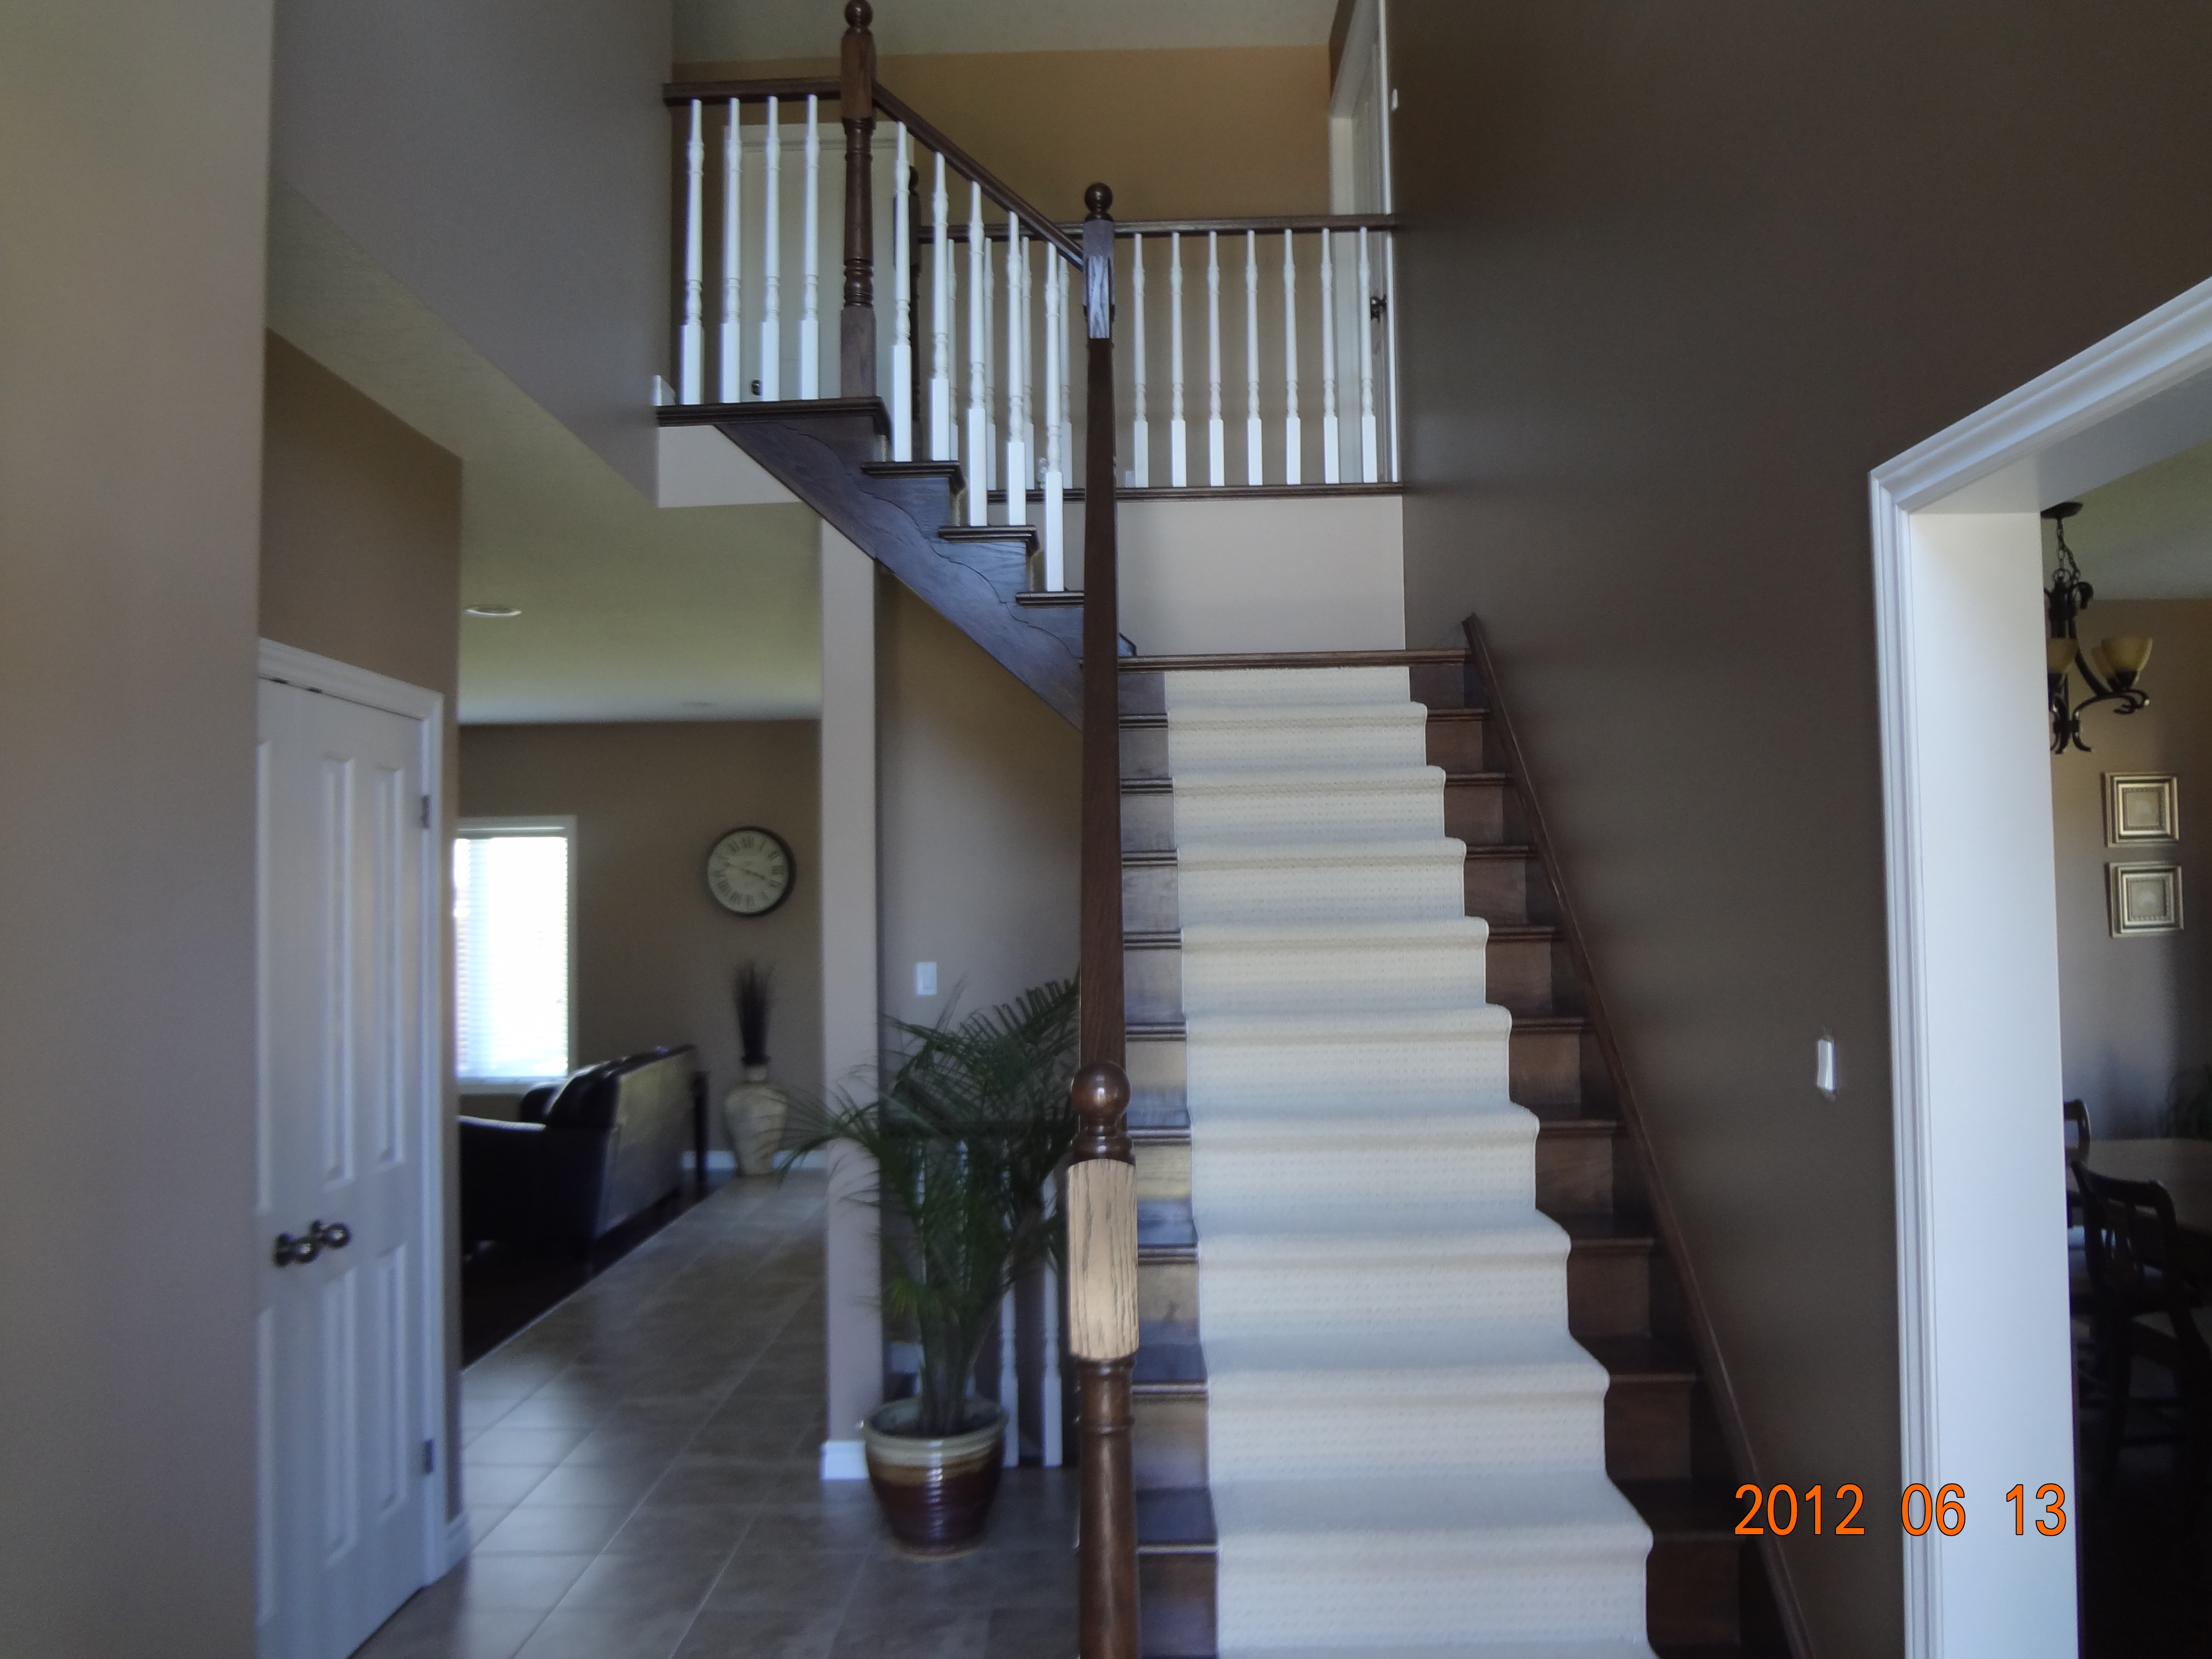 painting project in London, Ontario